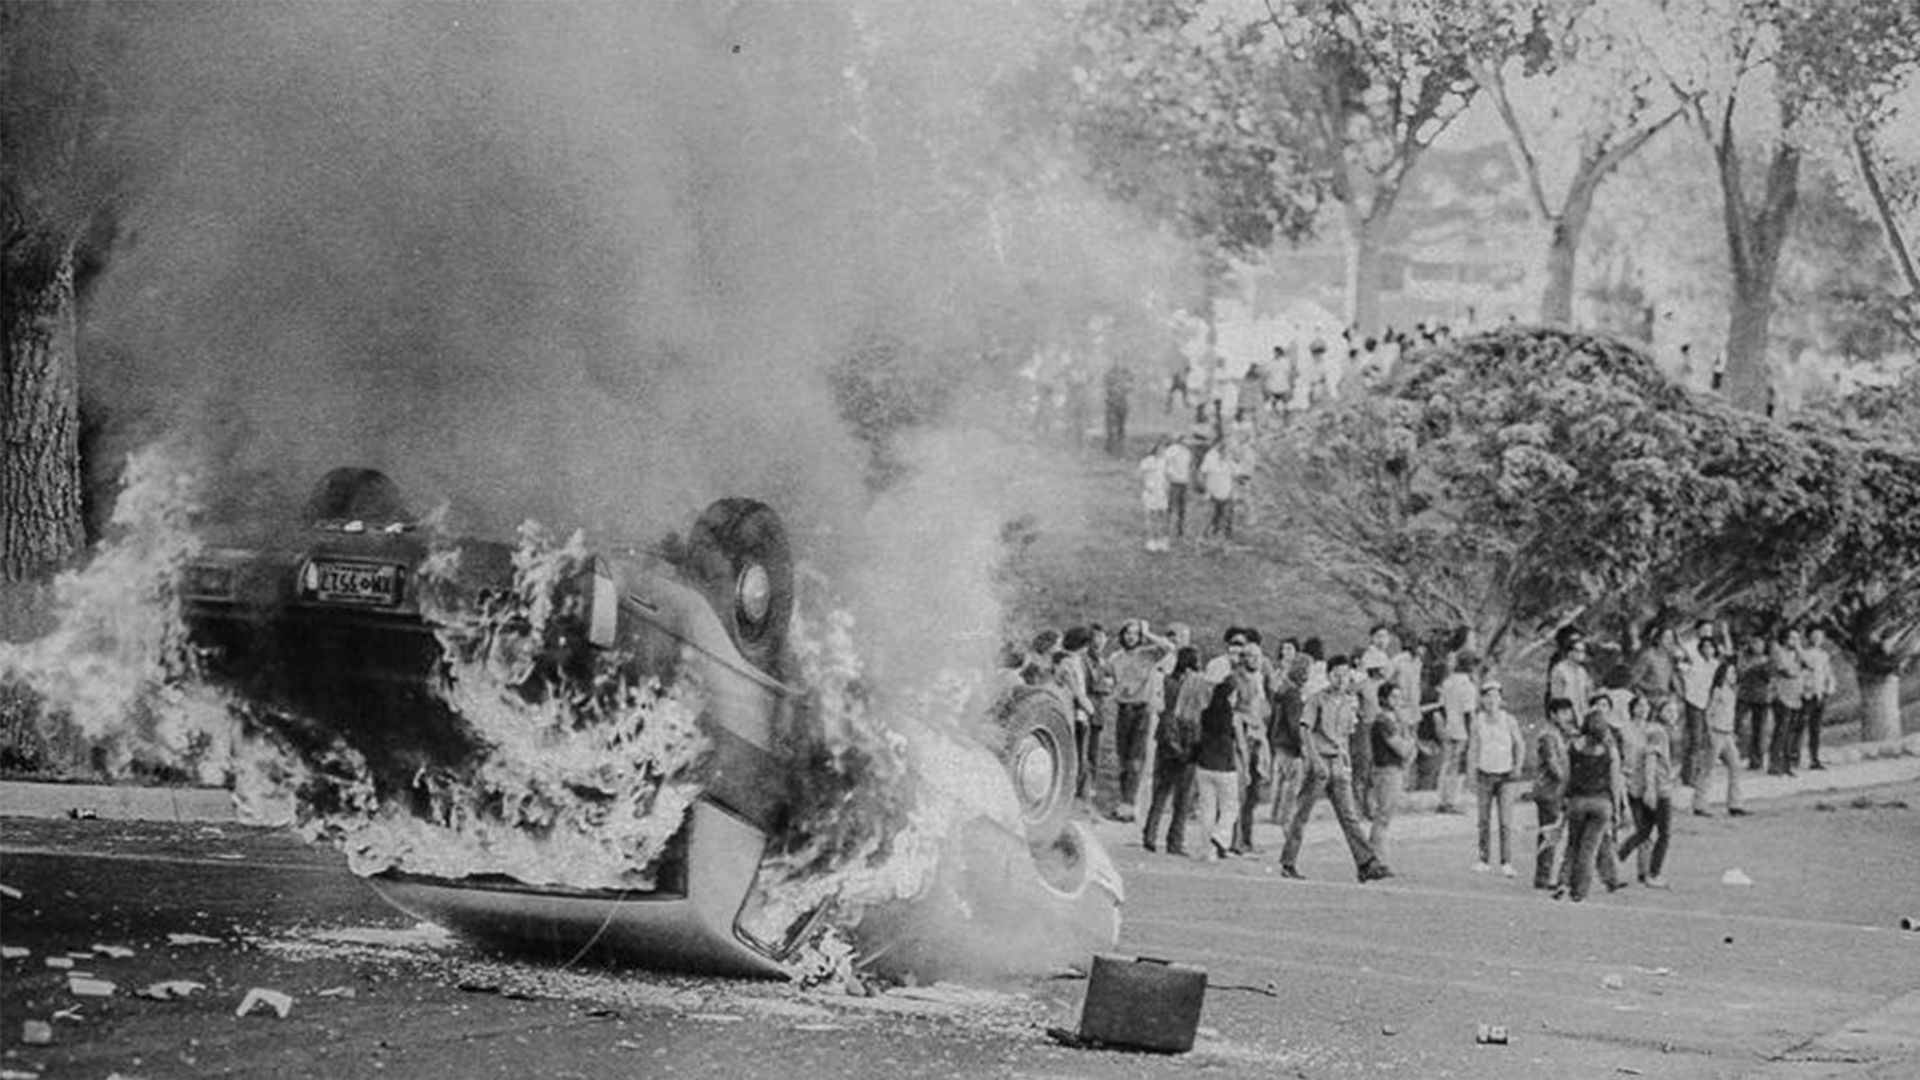 An overturned car burns as Mexican American demonstrators watch during a 1971 protest in Albuquerque.